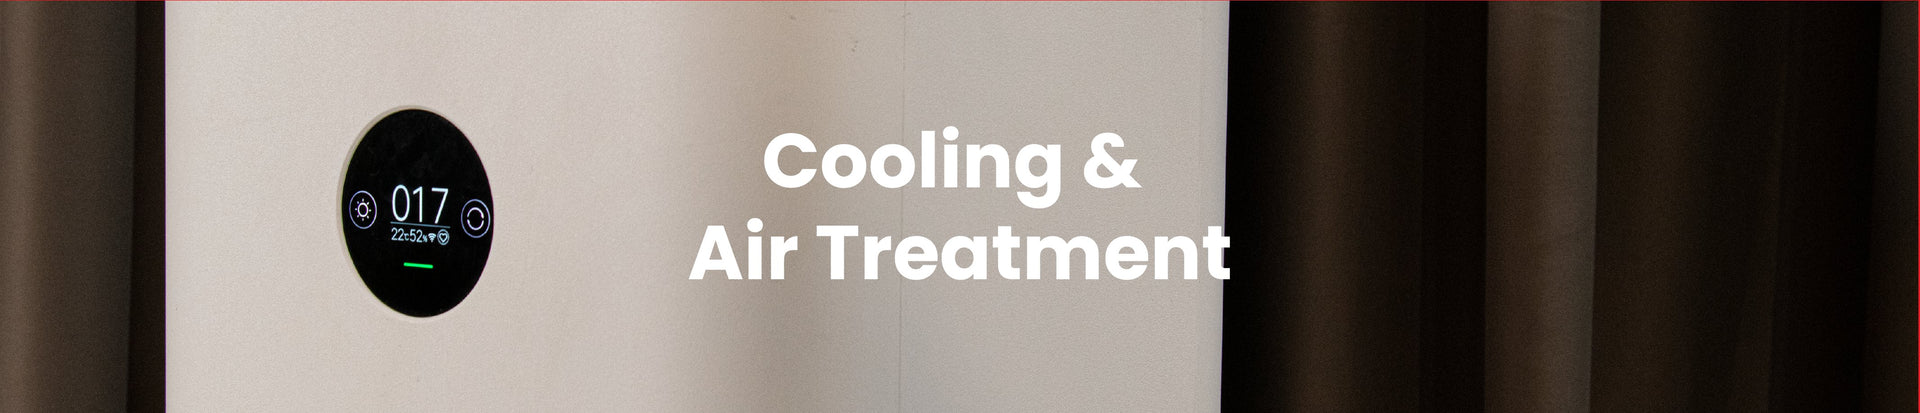 Cooling & Air Treatment